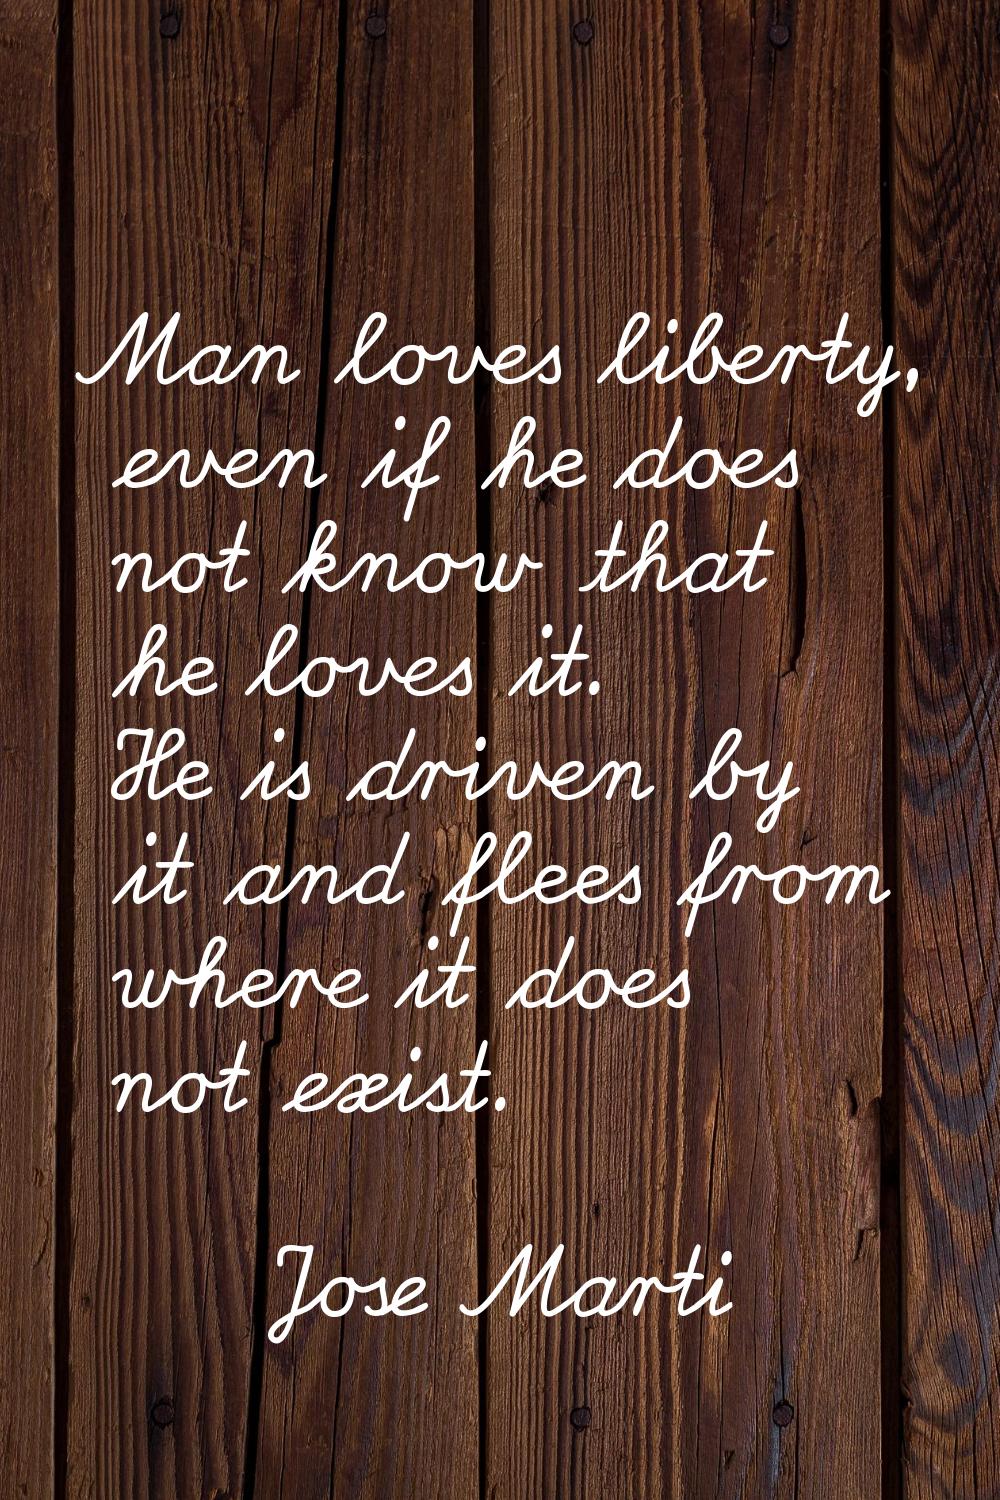 Man loves liberty, even if he does not know that he loves it. He is driven by it and flees from whe